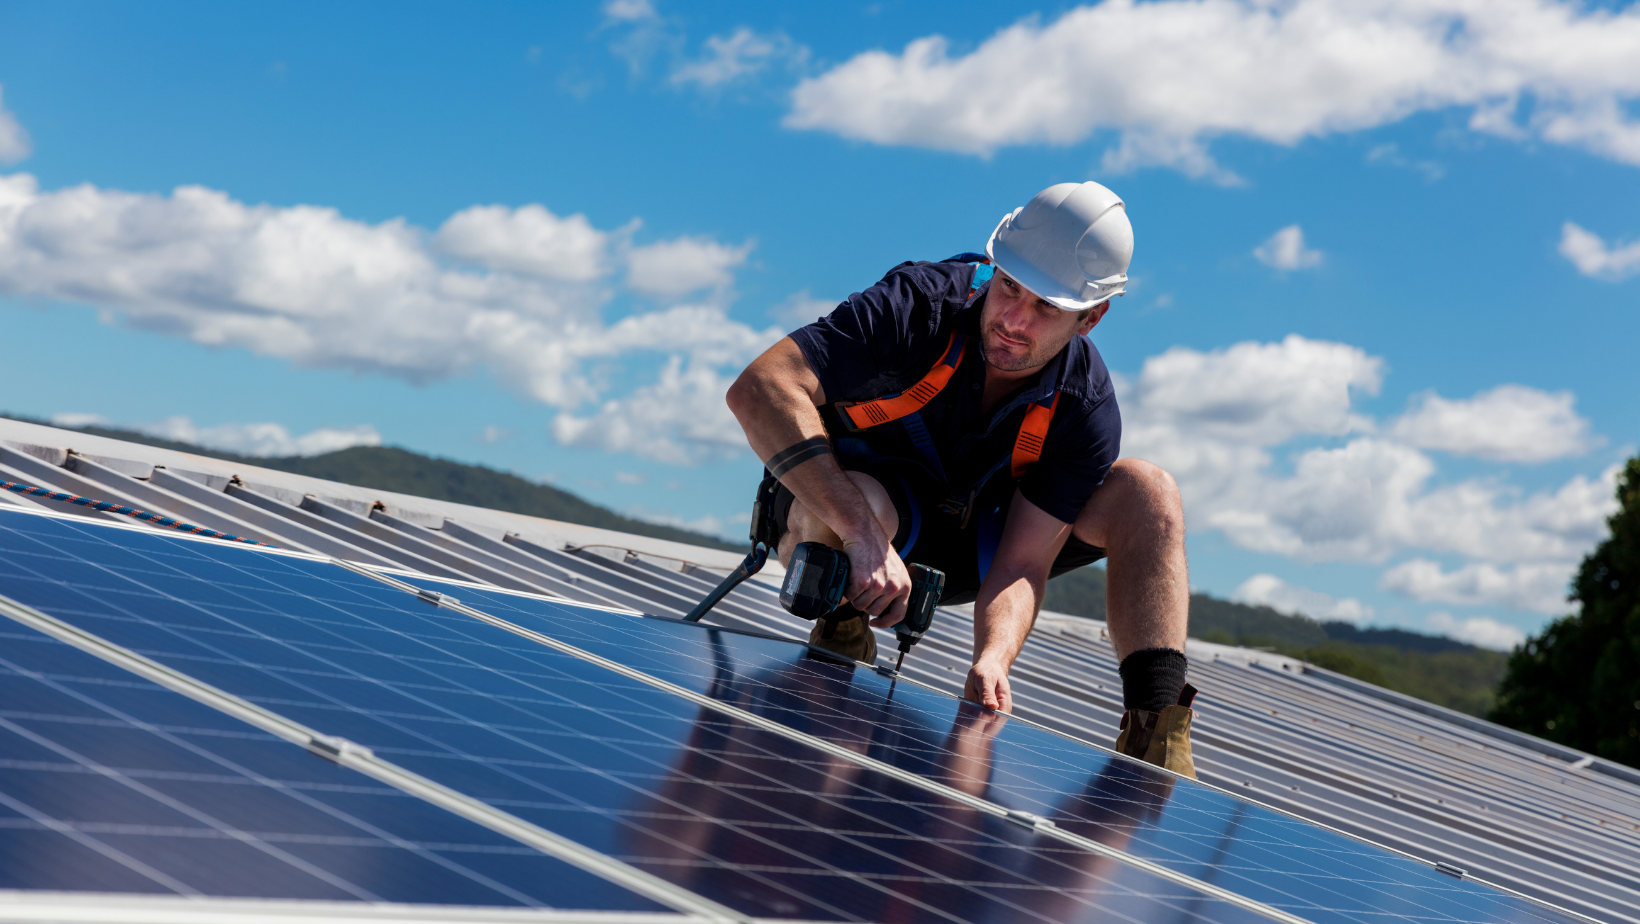 SHOULD YOU INSTALL SOLAR PANELS IN YOUR HOME?